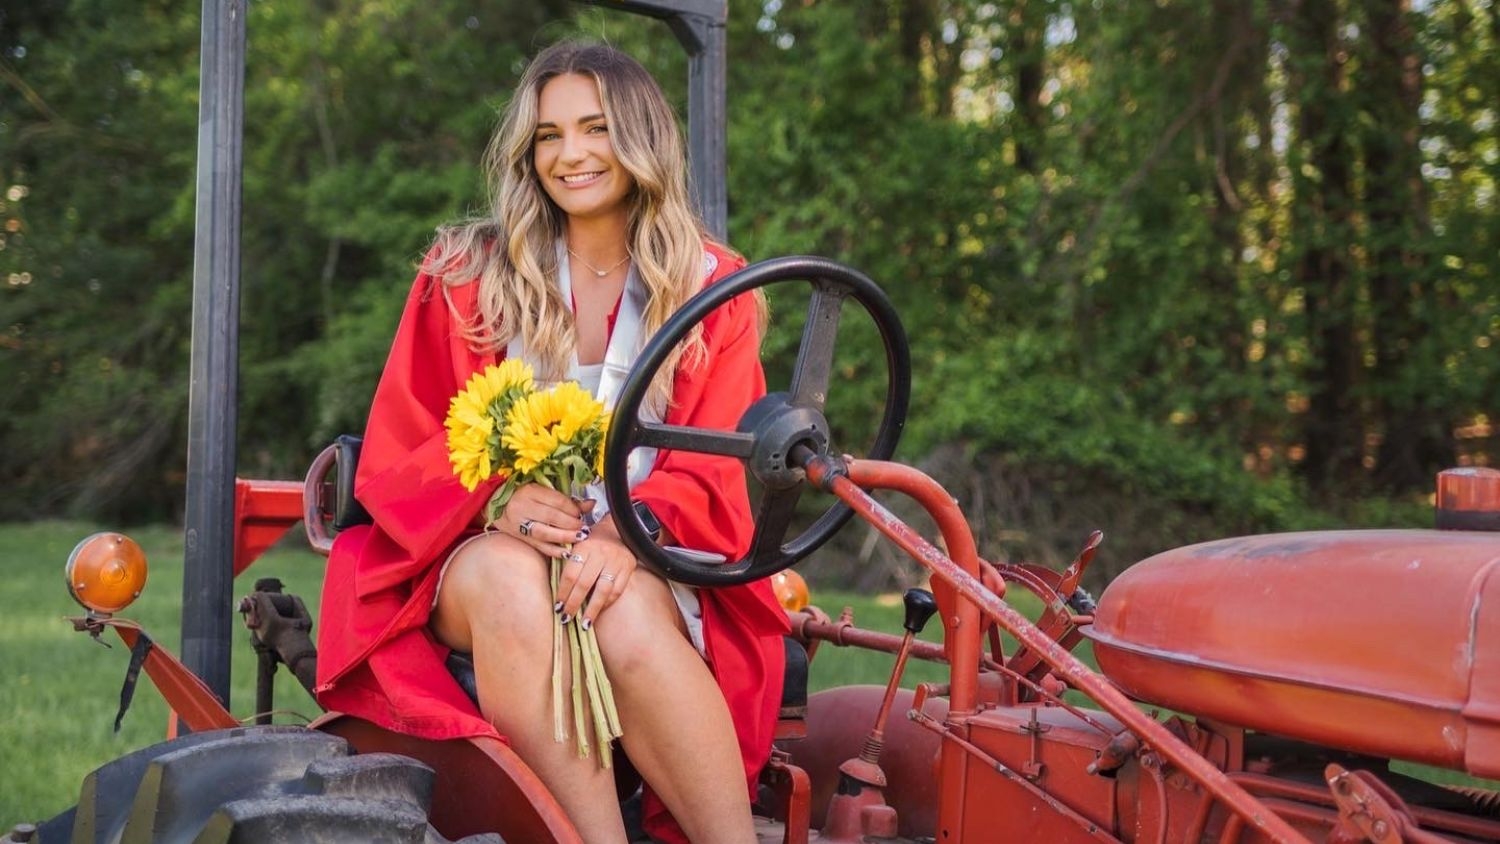 Abby Pleasant holding sunflowers in her graduation gown on a tractor